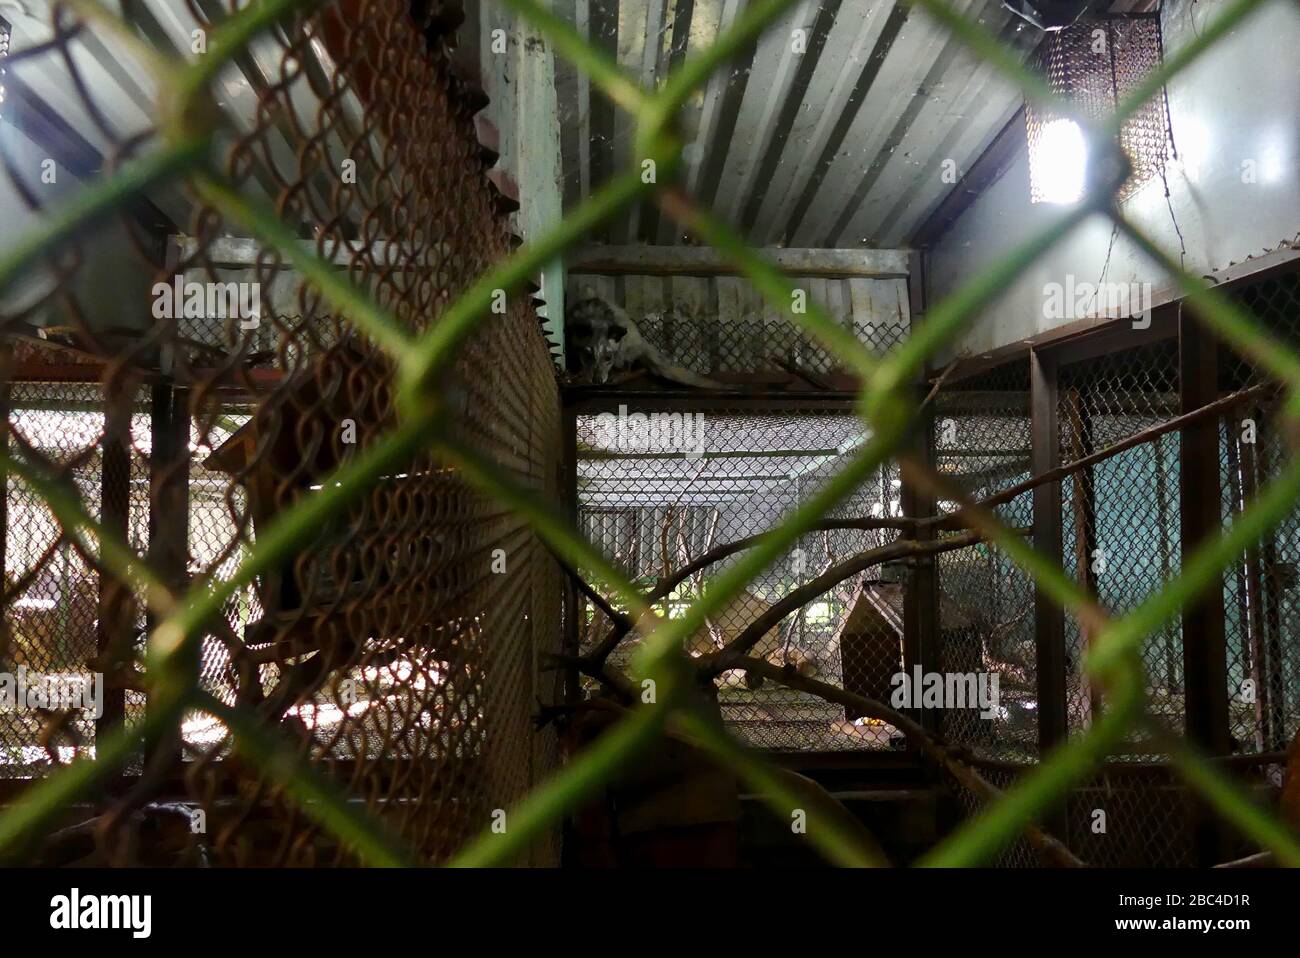 asian palm civet,Kopi luwak,caged,asia,vietnam,cage,agriculture,animal,captive,coffee,weasel,production,drink,controversial,captivity,trapped,small,so Stock Photo